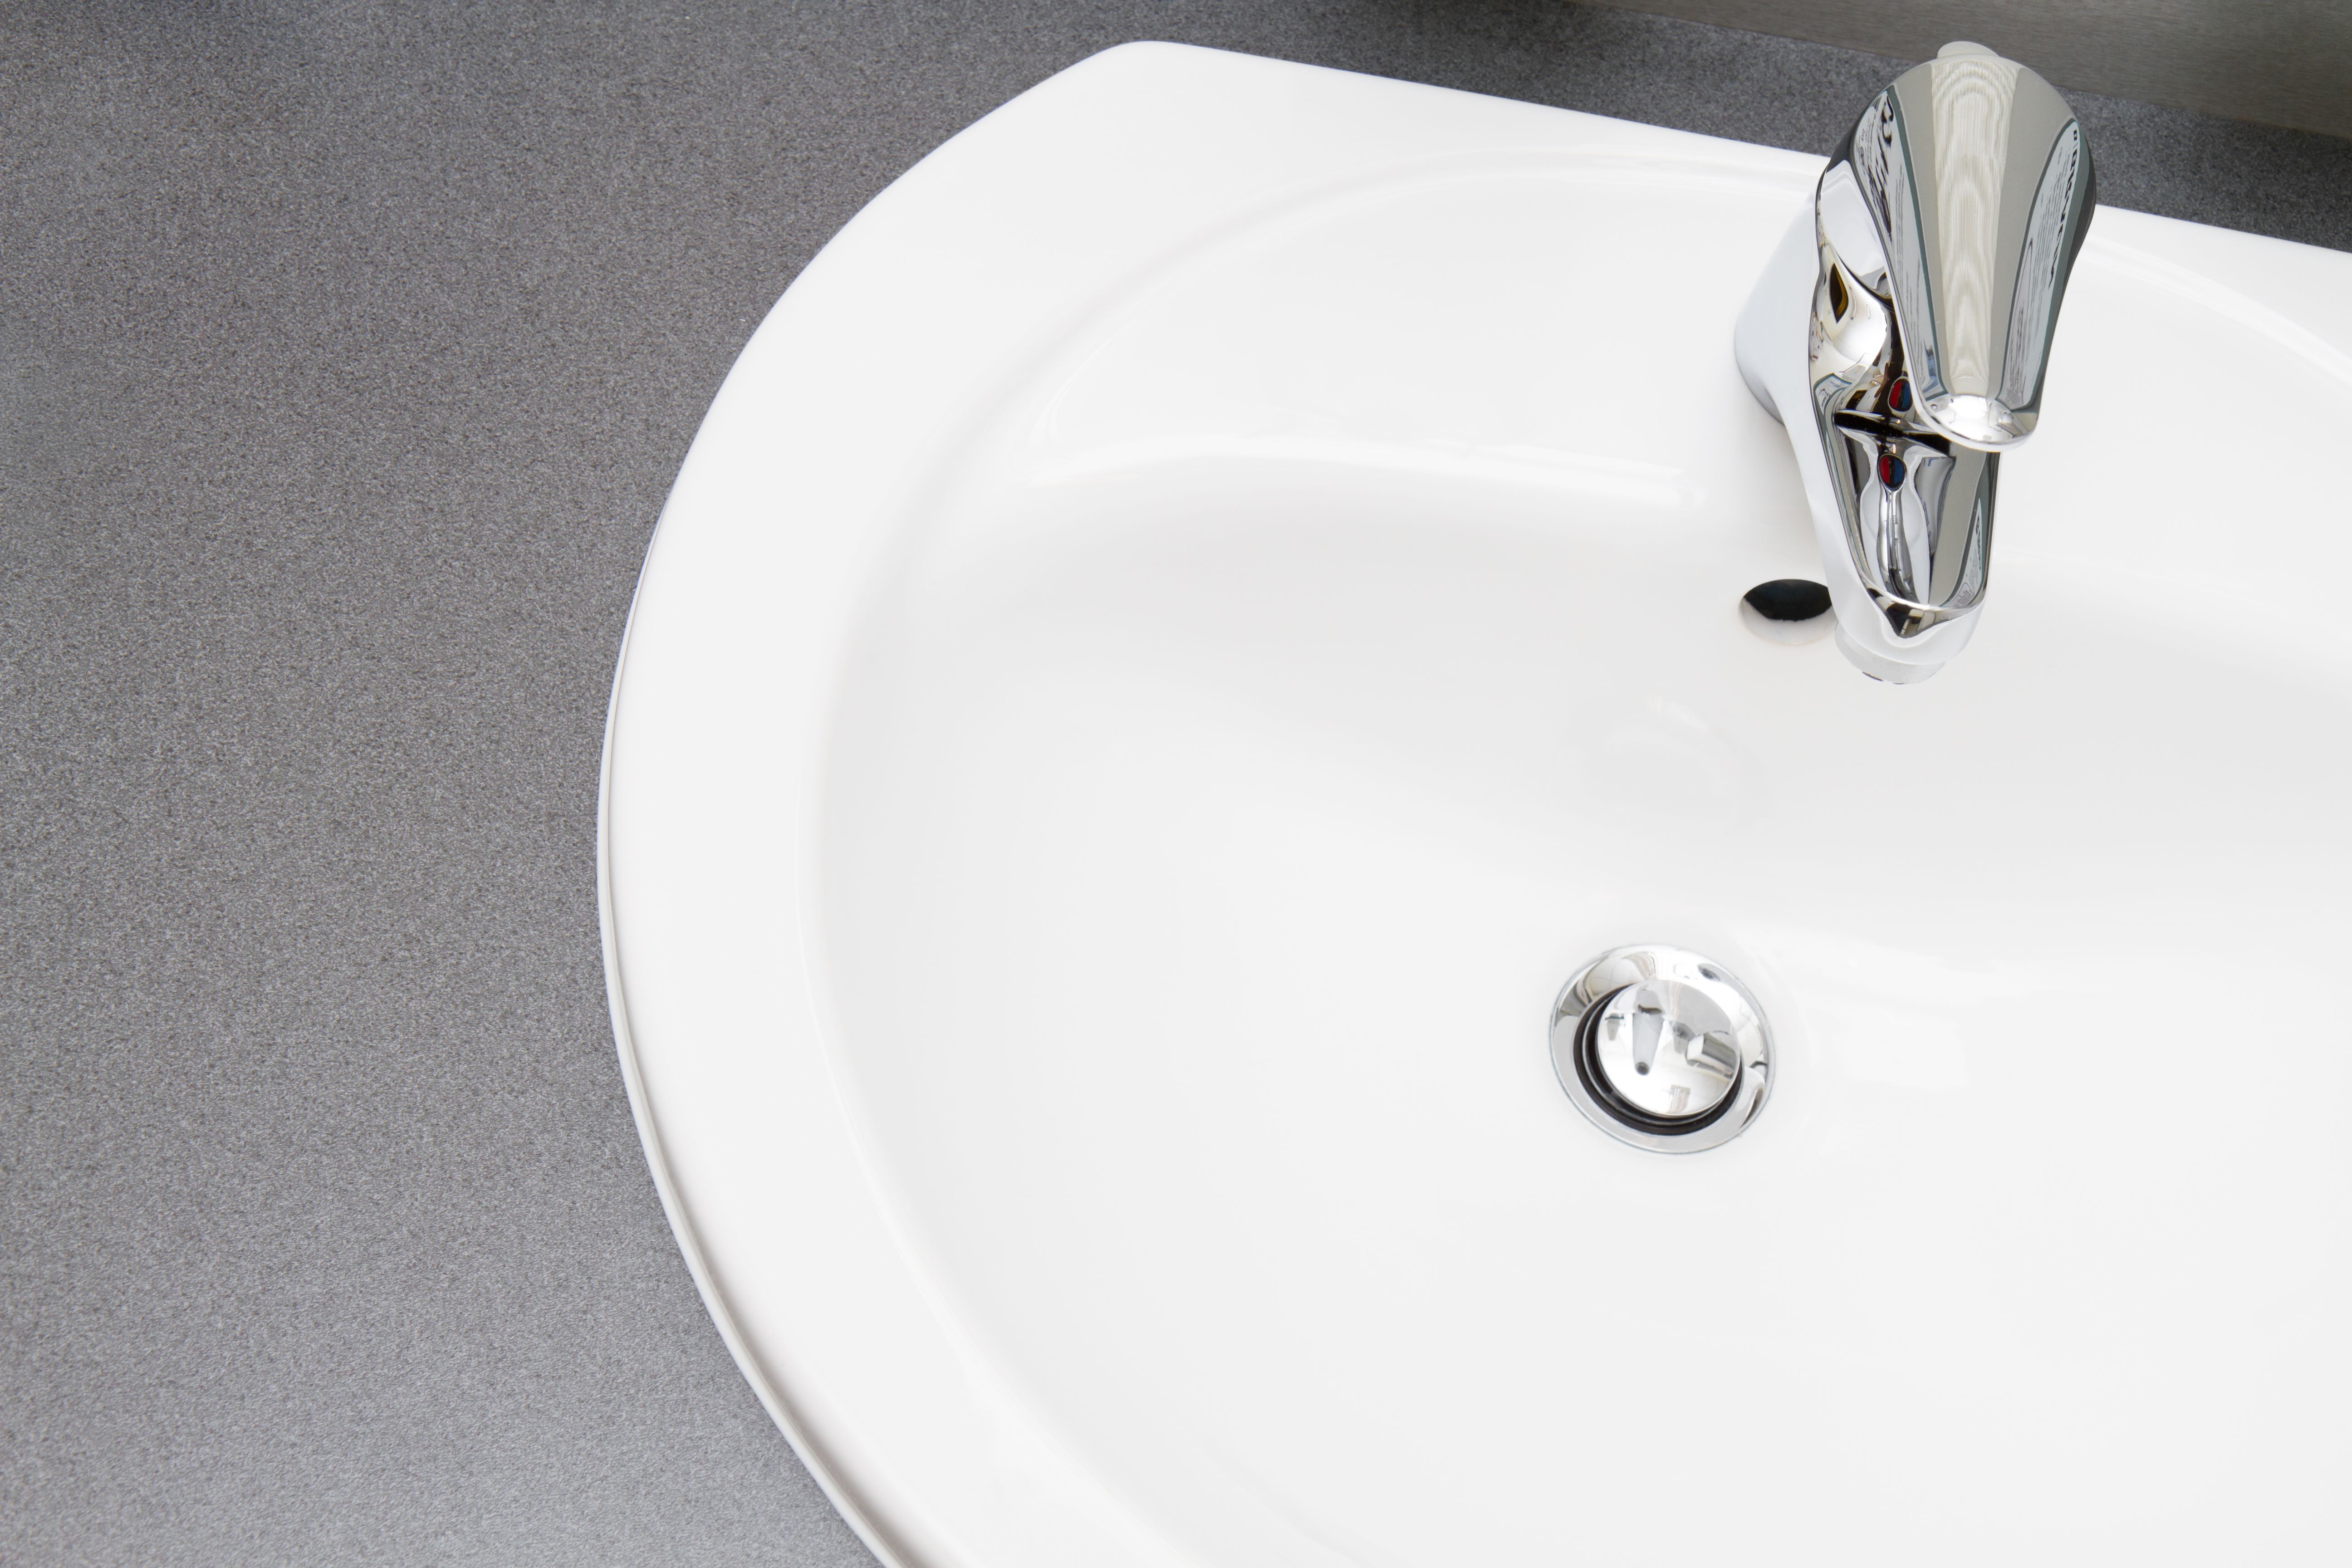 How To Install Pop Up Drain In A Bathroom Sink